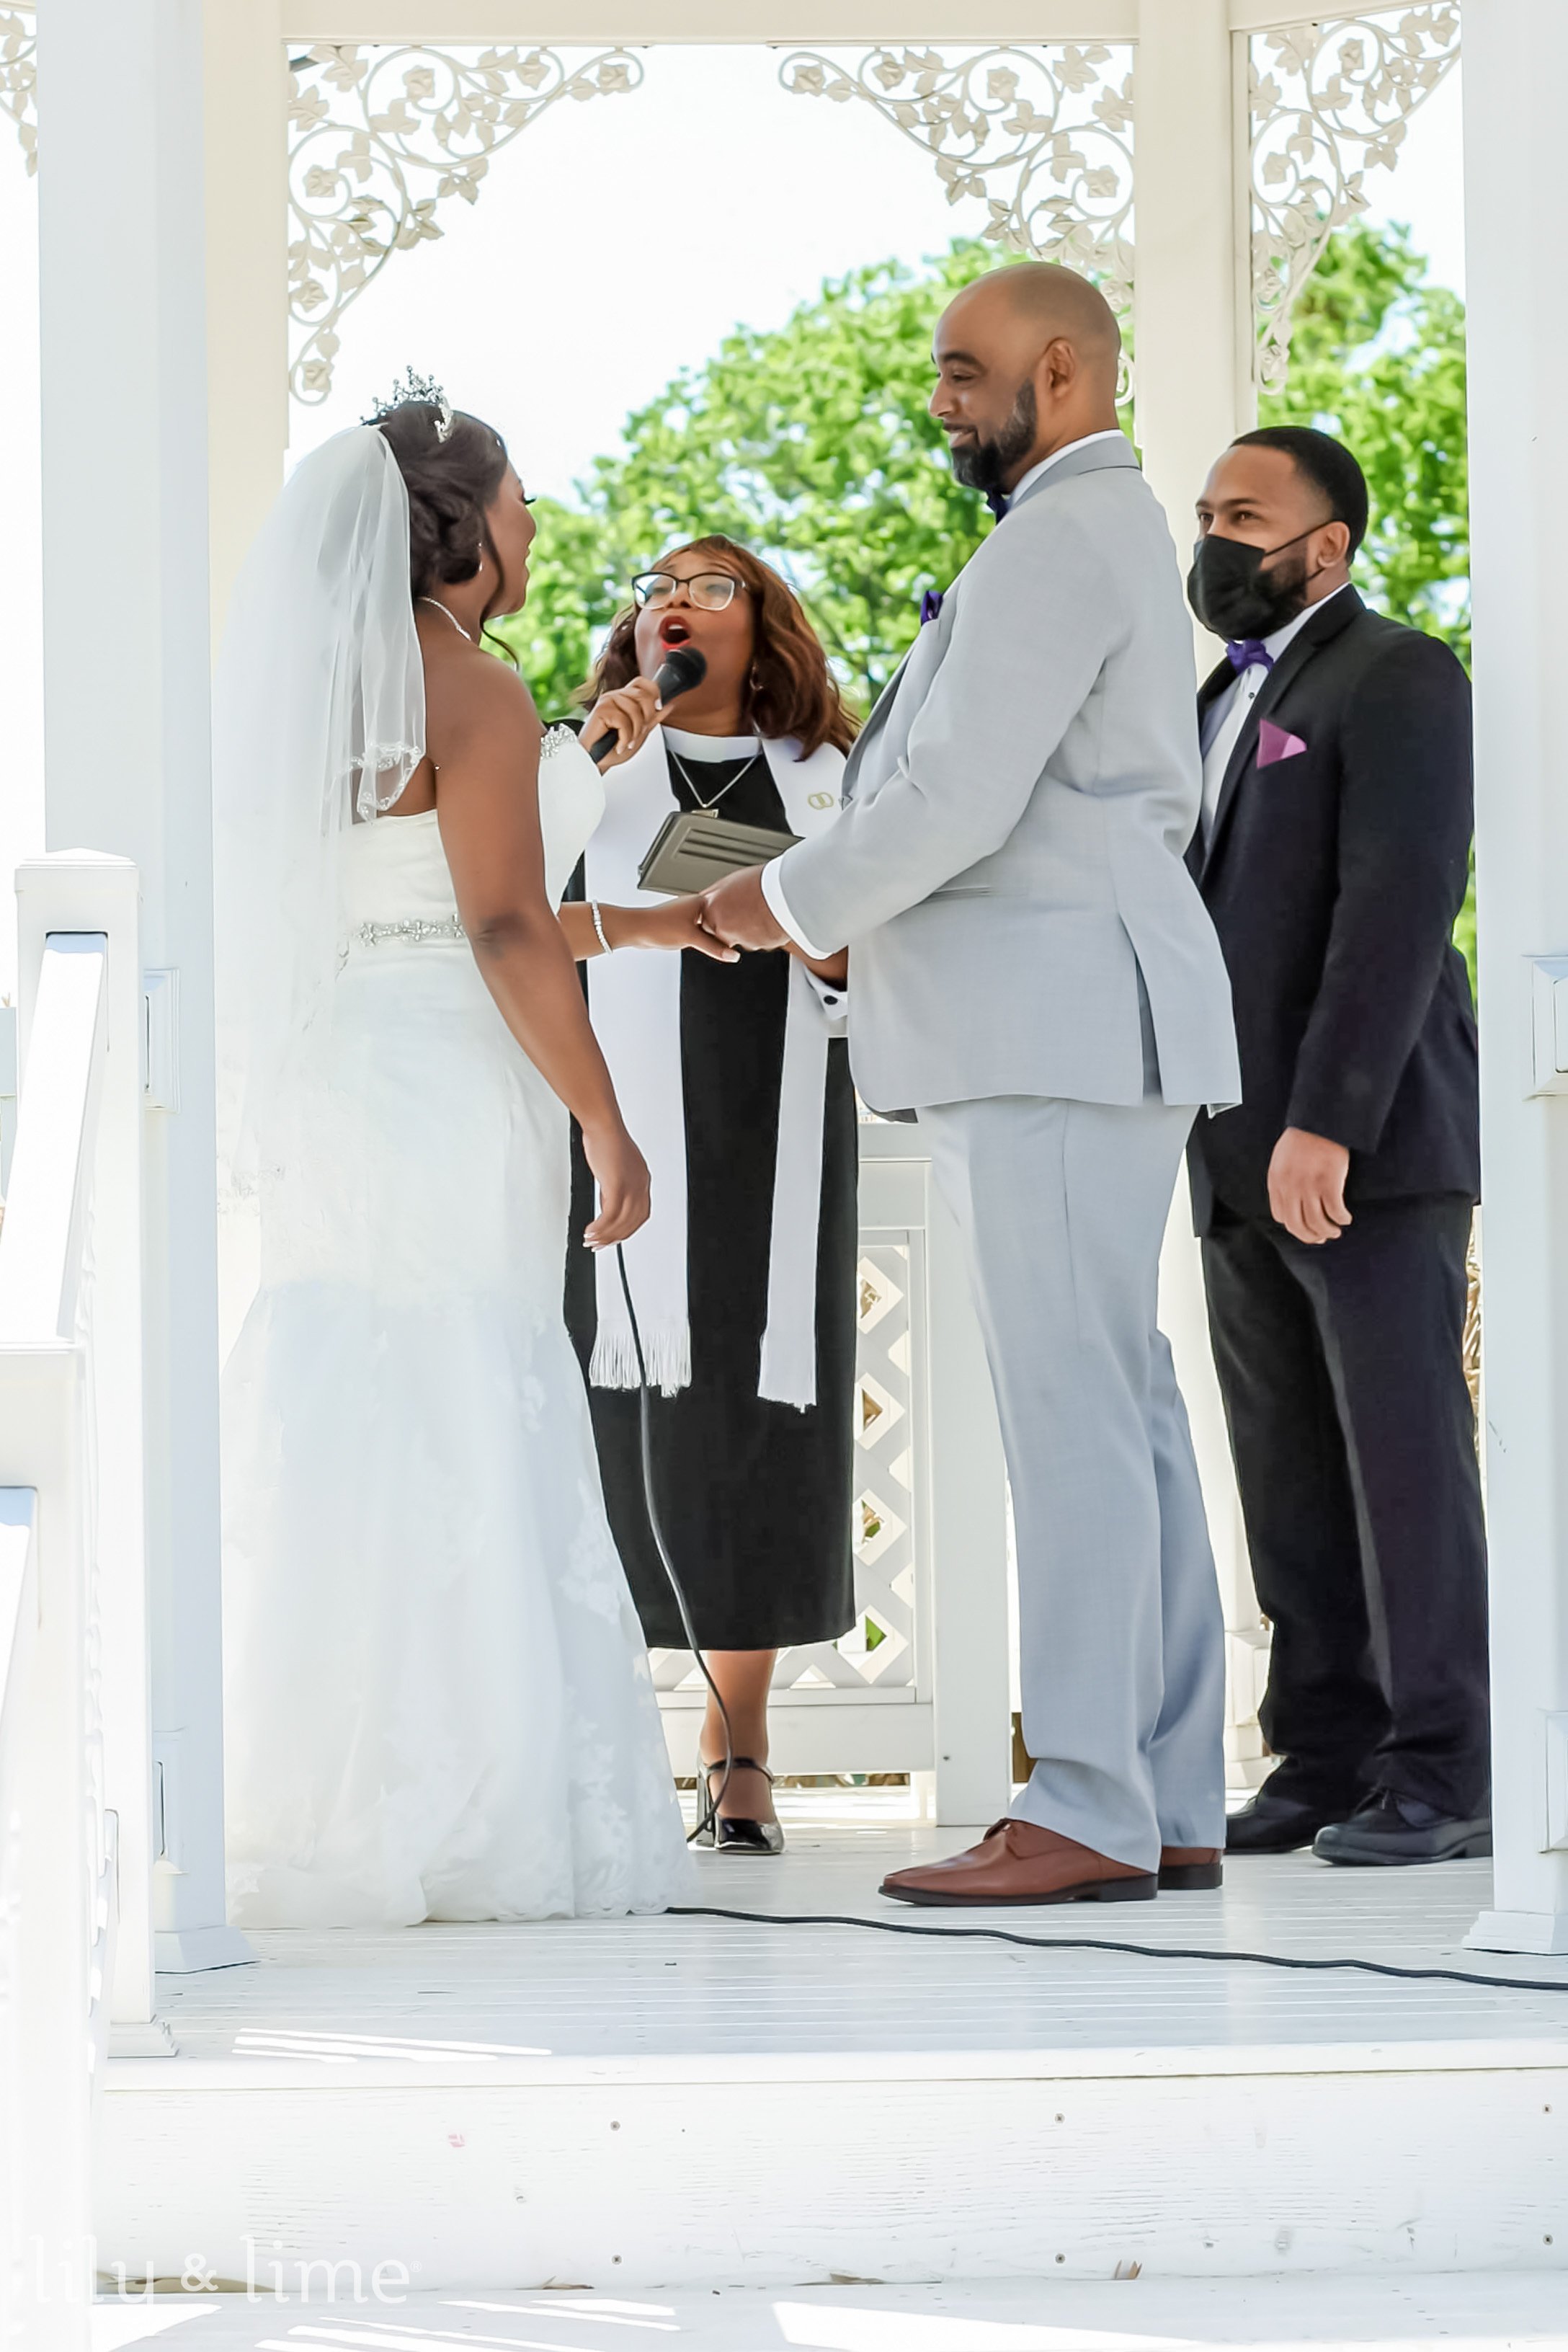 Black Wedding Traditions You May Not Know About BridalGuide